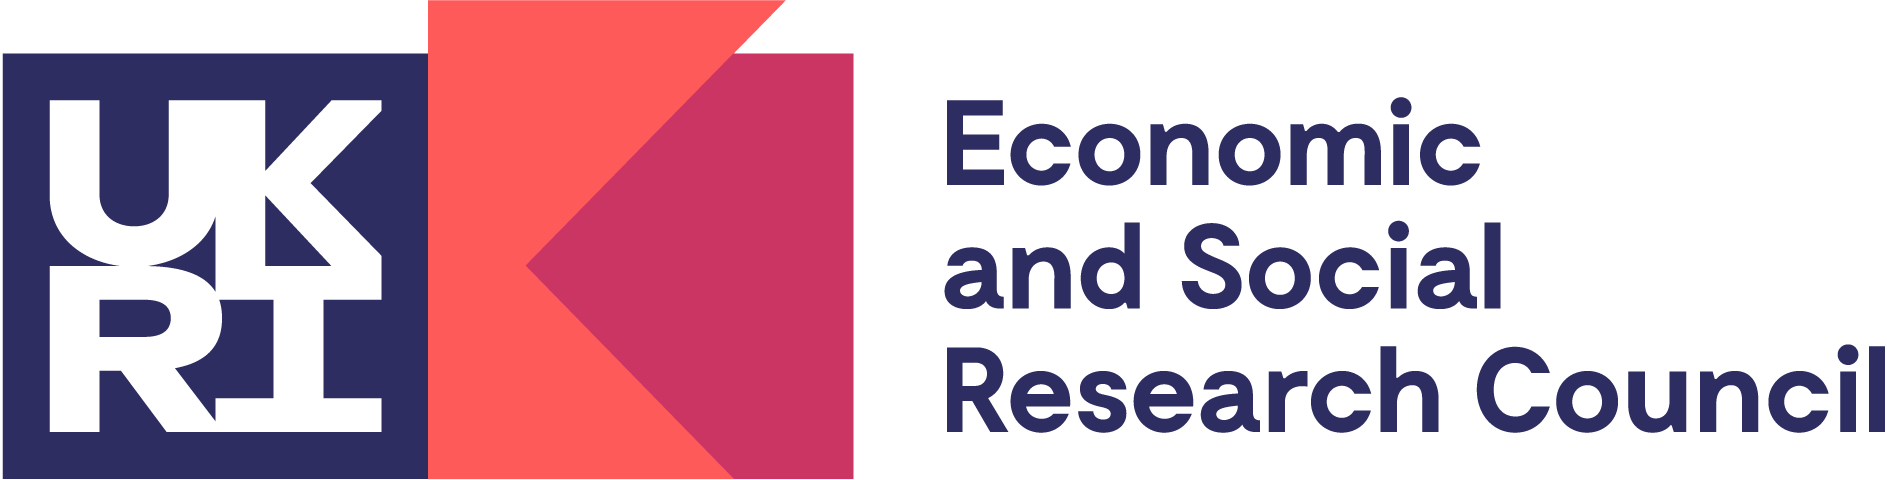 Funded by UKRI through the Economic and Social Research Council